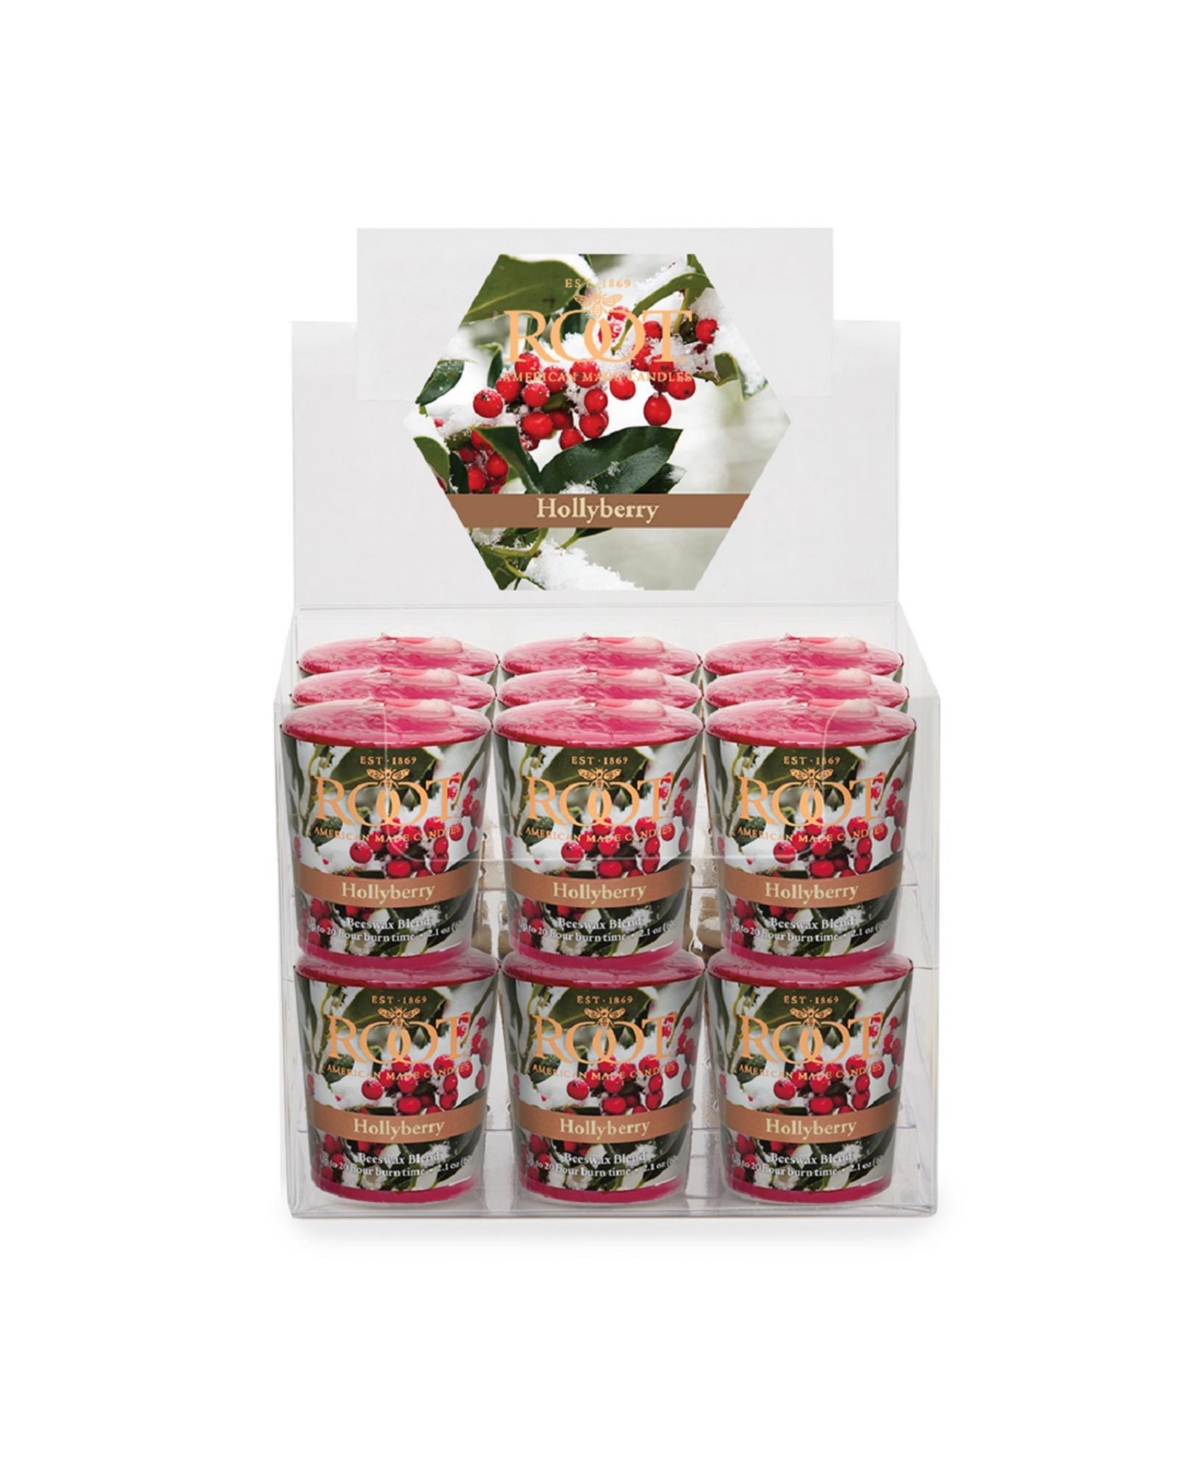 Votive Holly berry 20 Hour Candles Set, 18 Piece - Red